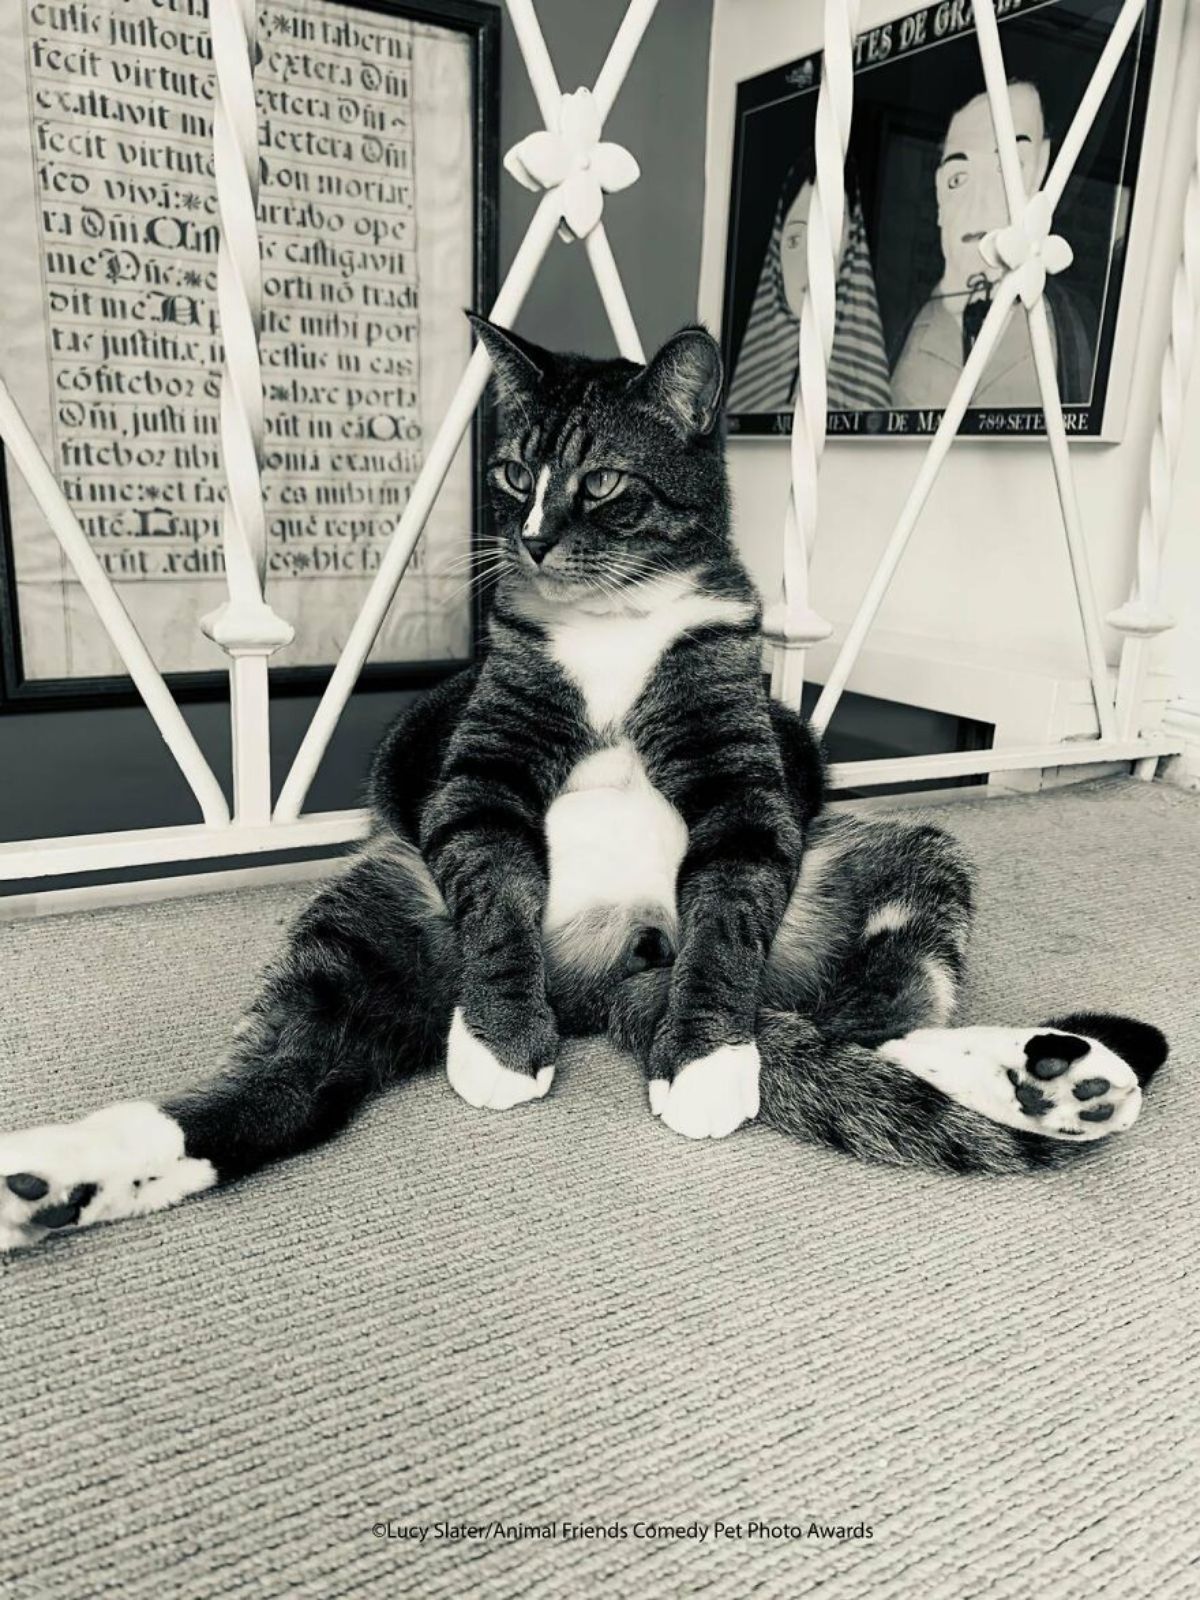 black and white tabby cat sitting on grey carpet with the front legs placed between the back legs splayed on the ground